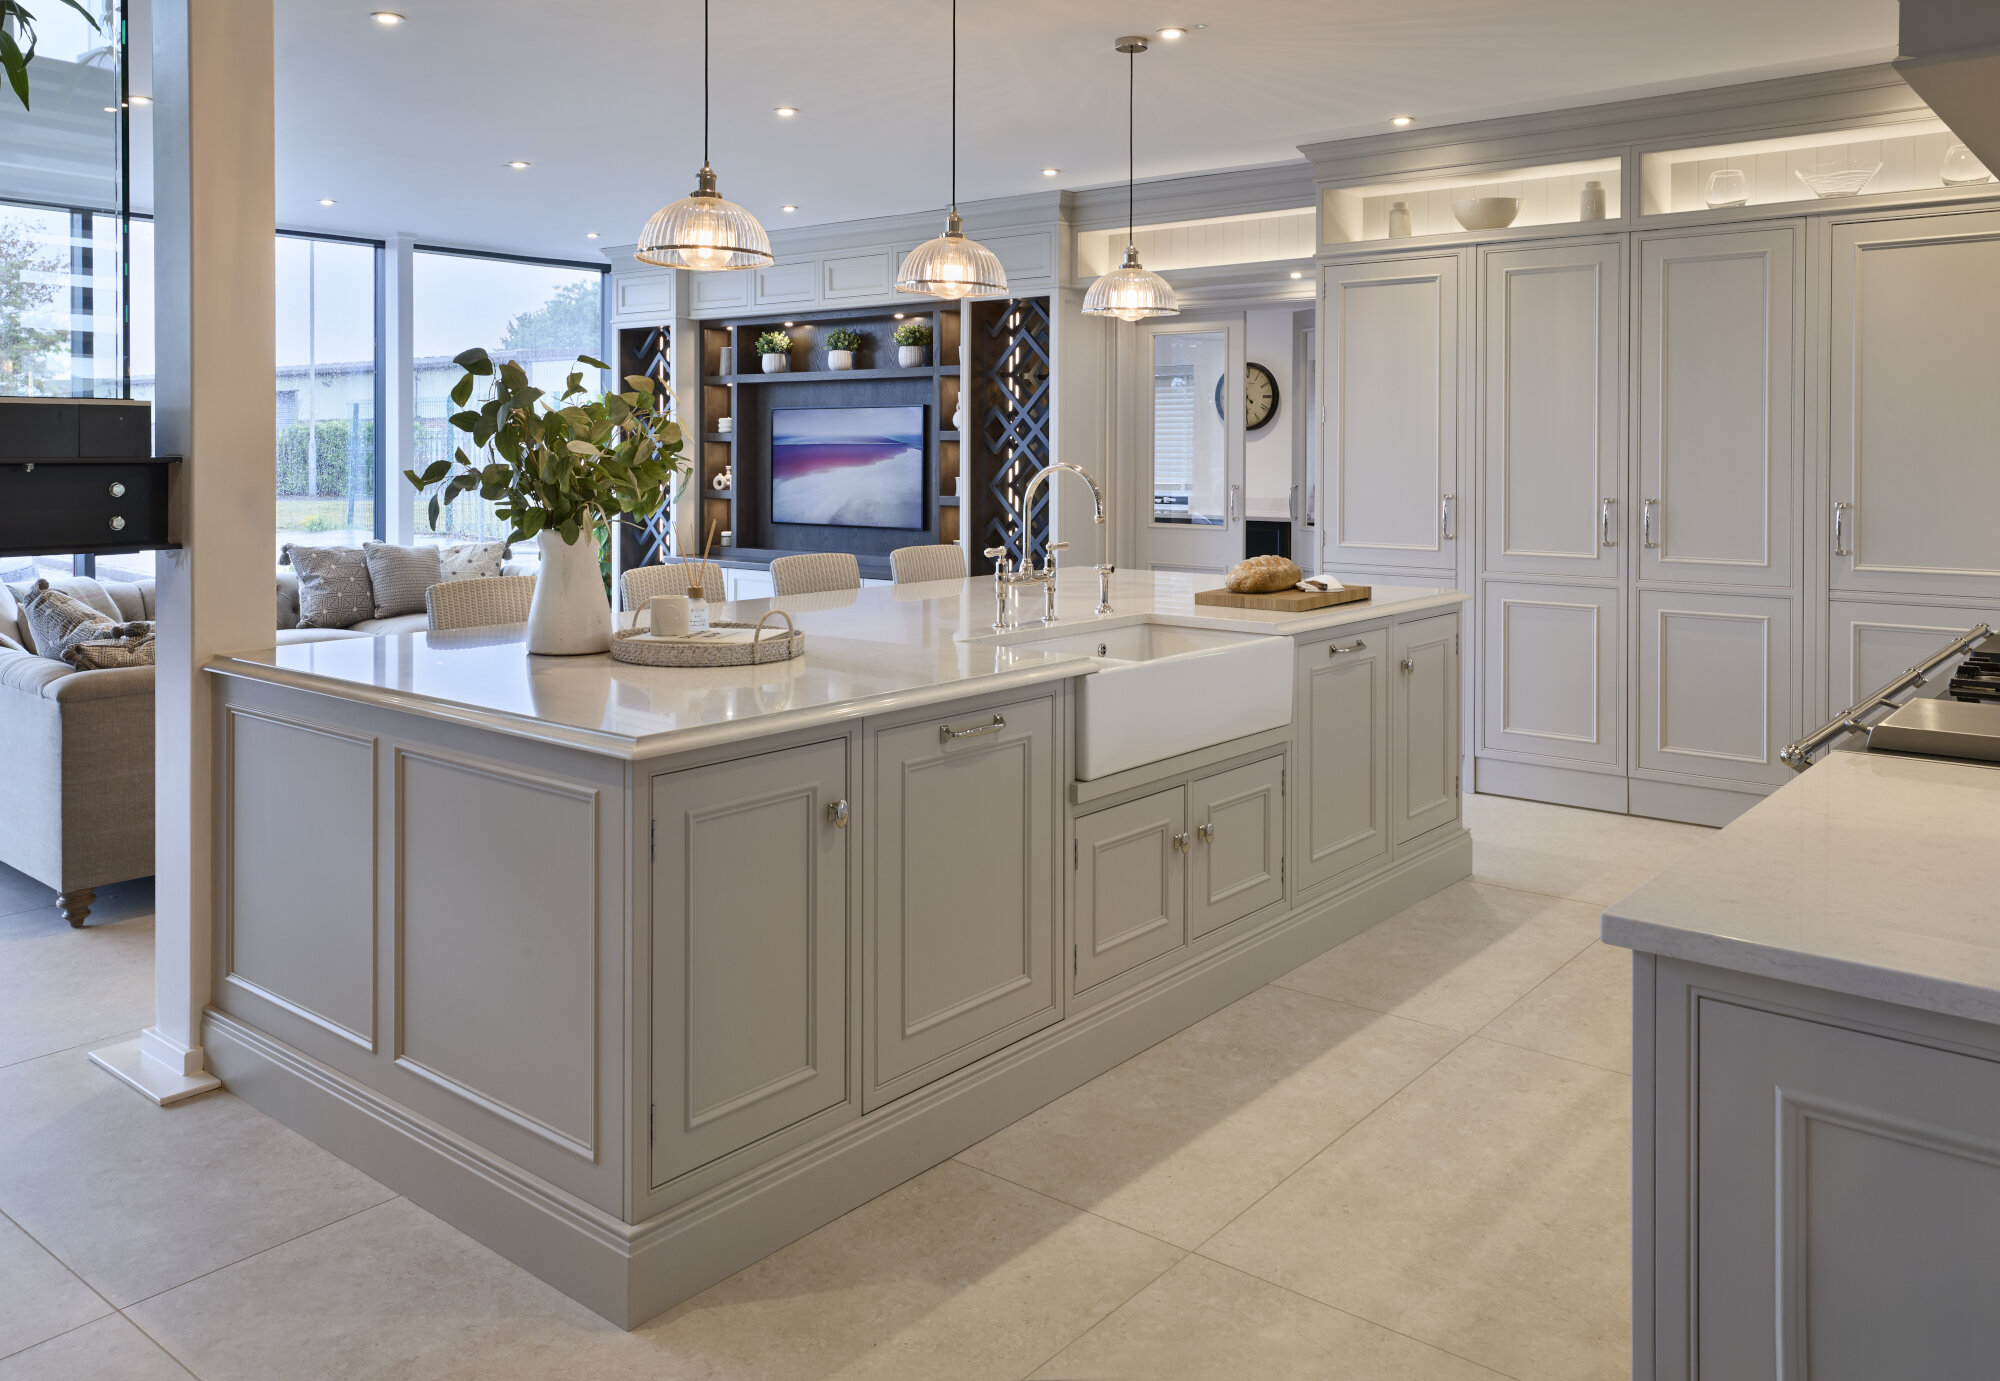 This Bespoke Kitchen Design is on display in our showroom near Grimsby